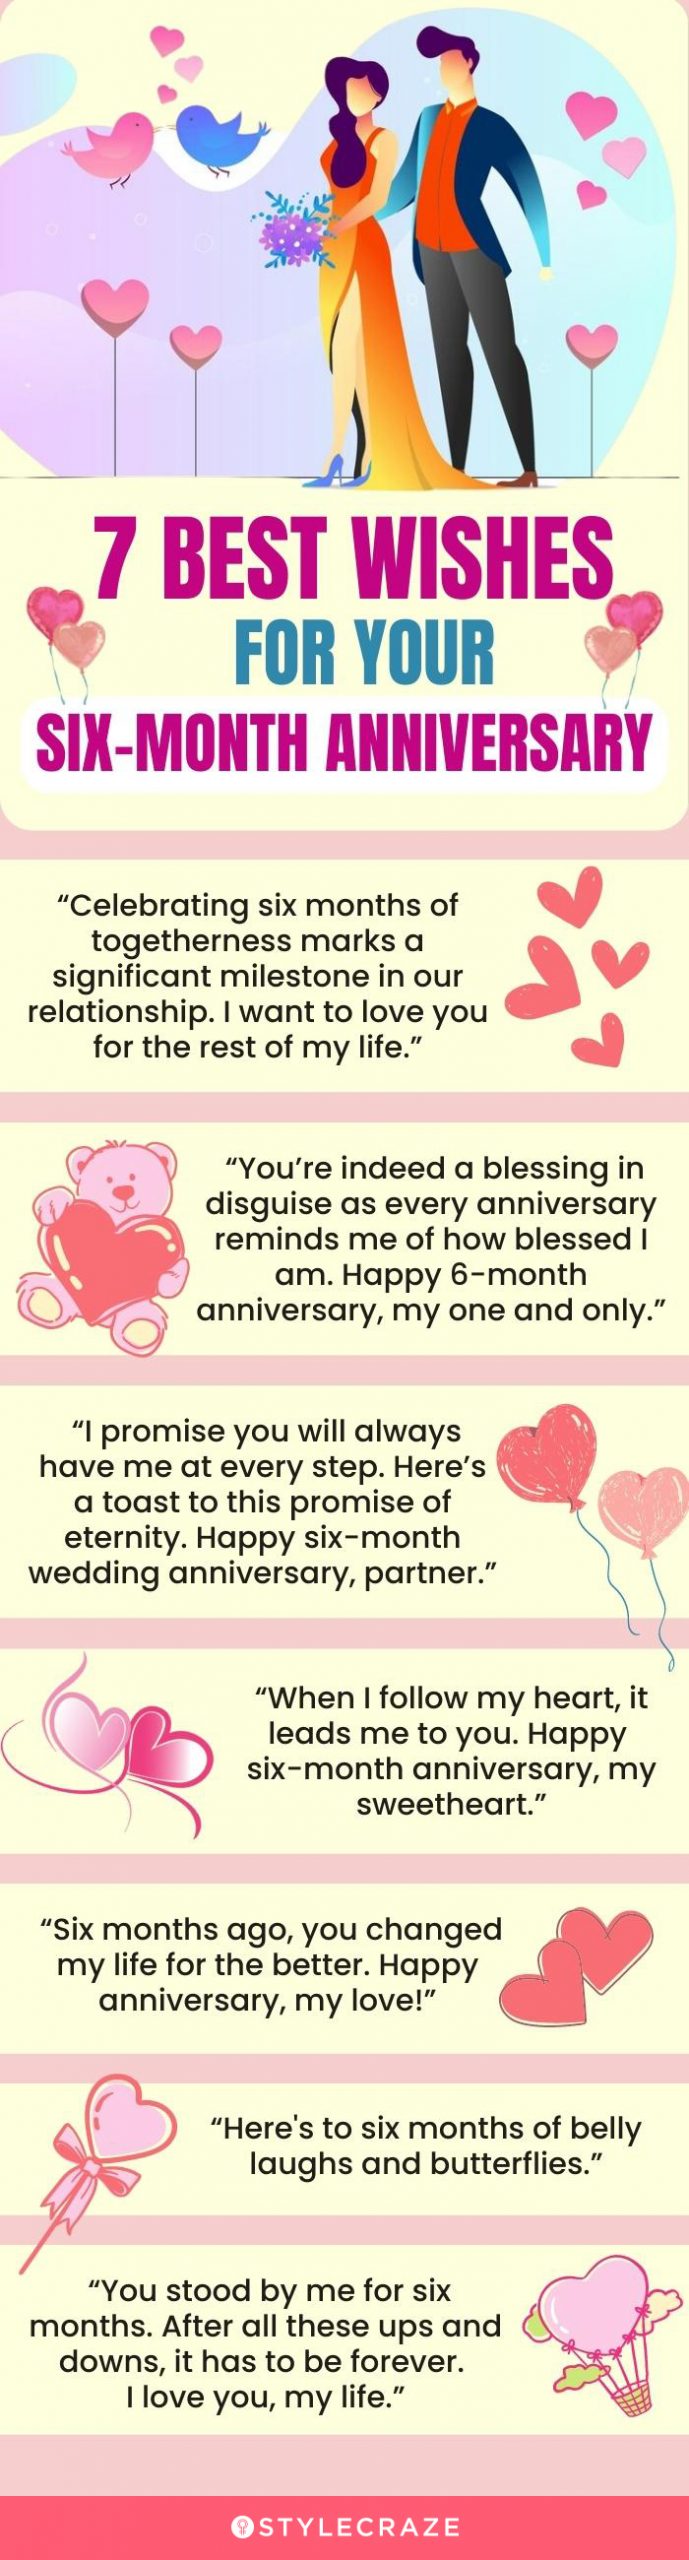 7 best wishes for your six month anniversary (infographic)